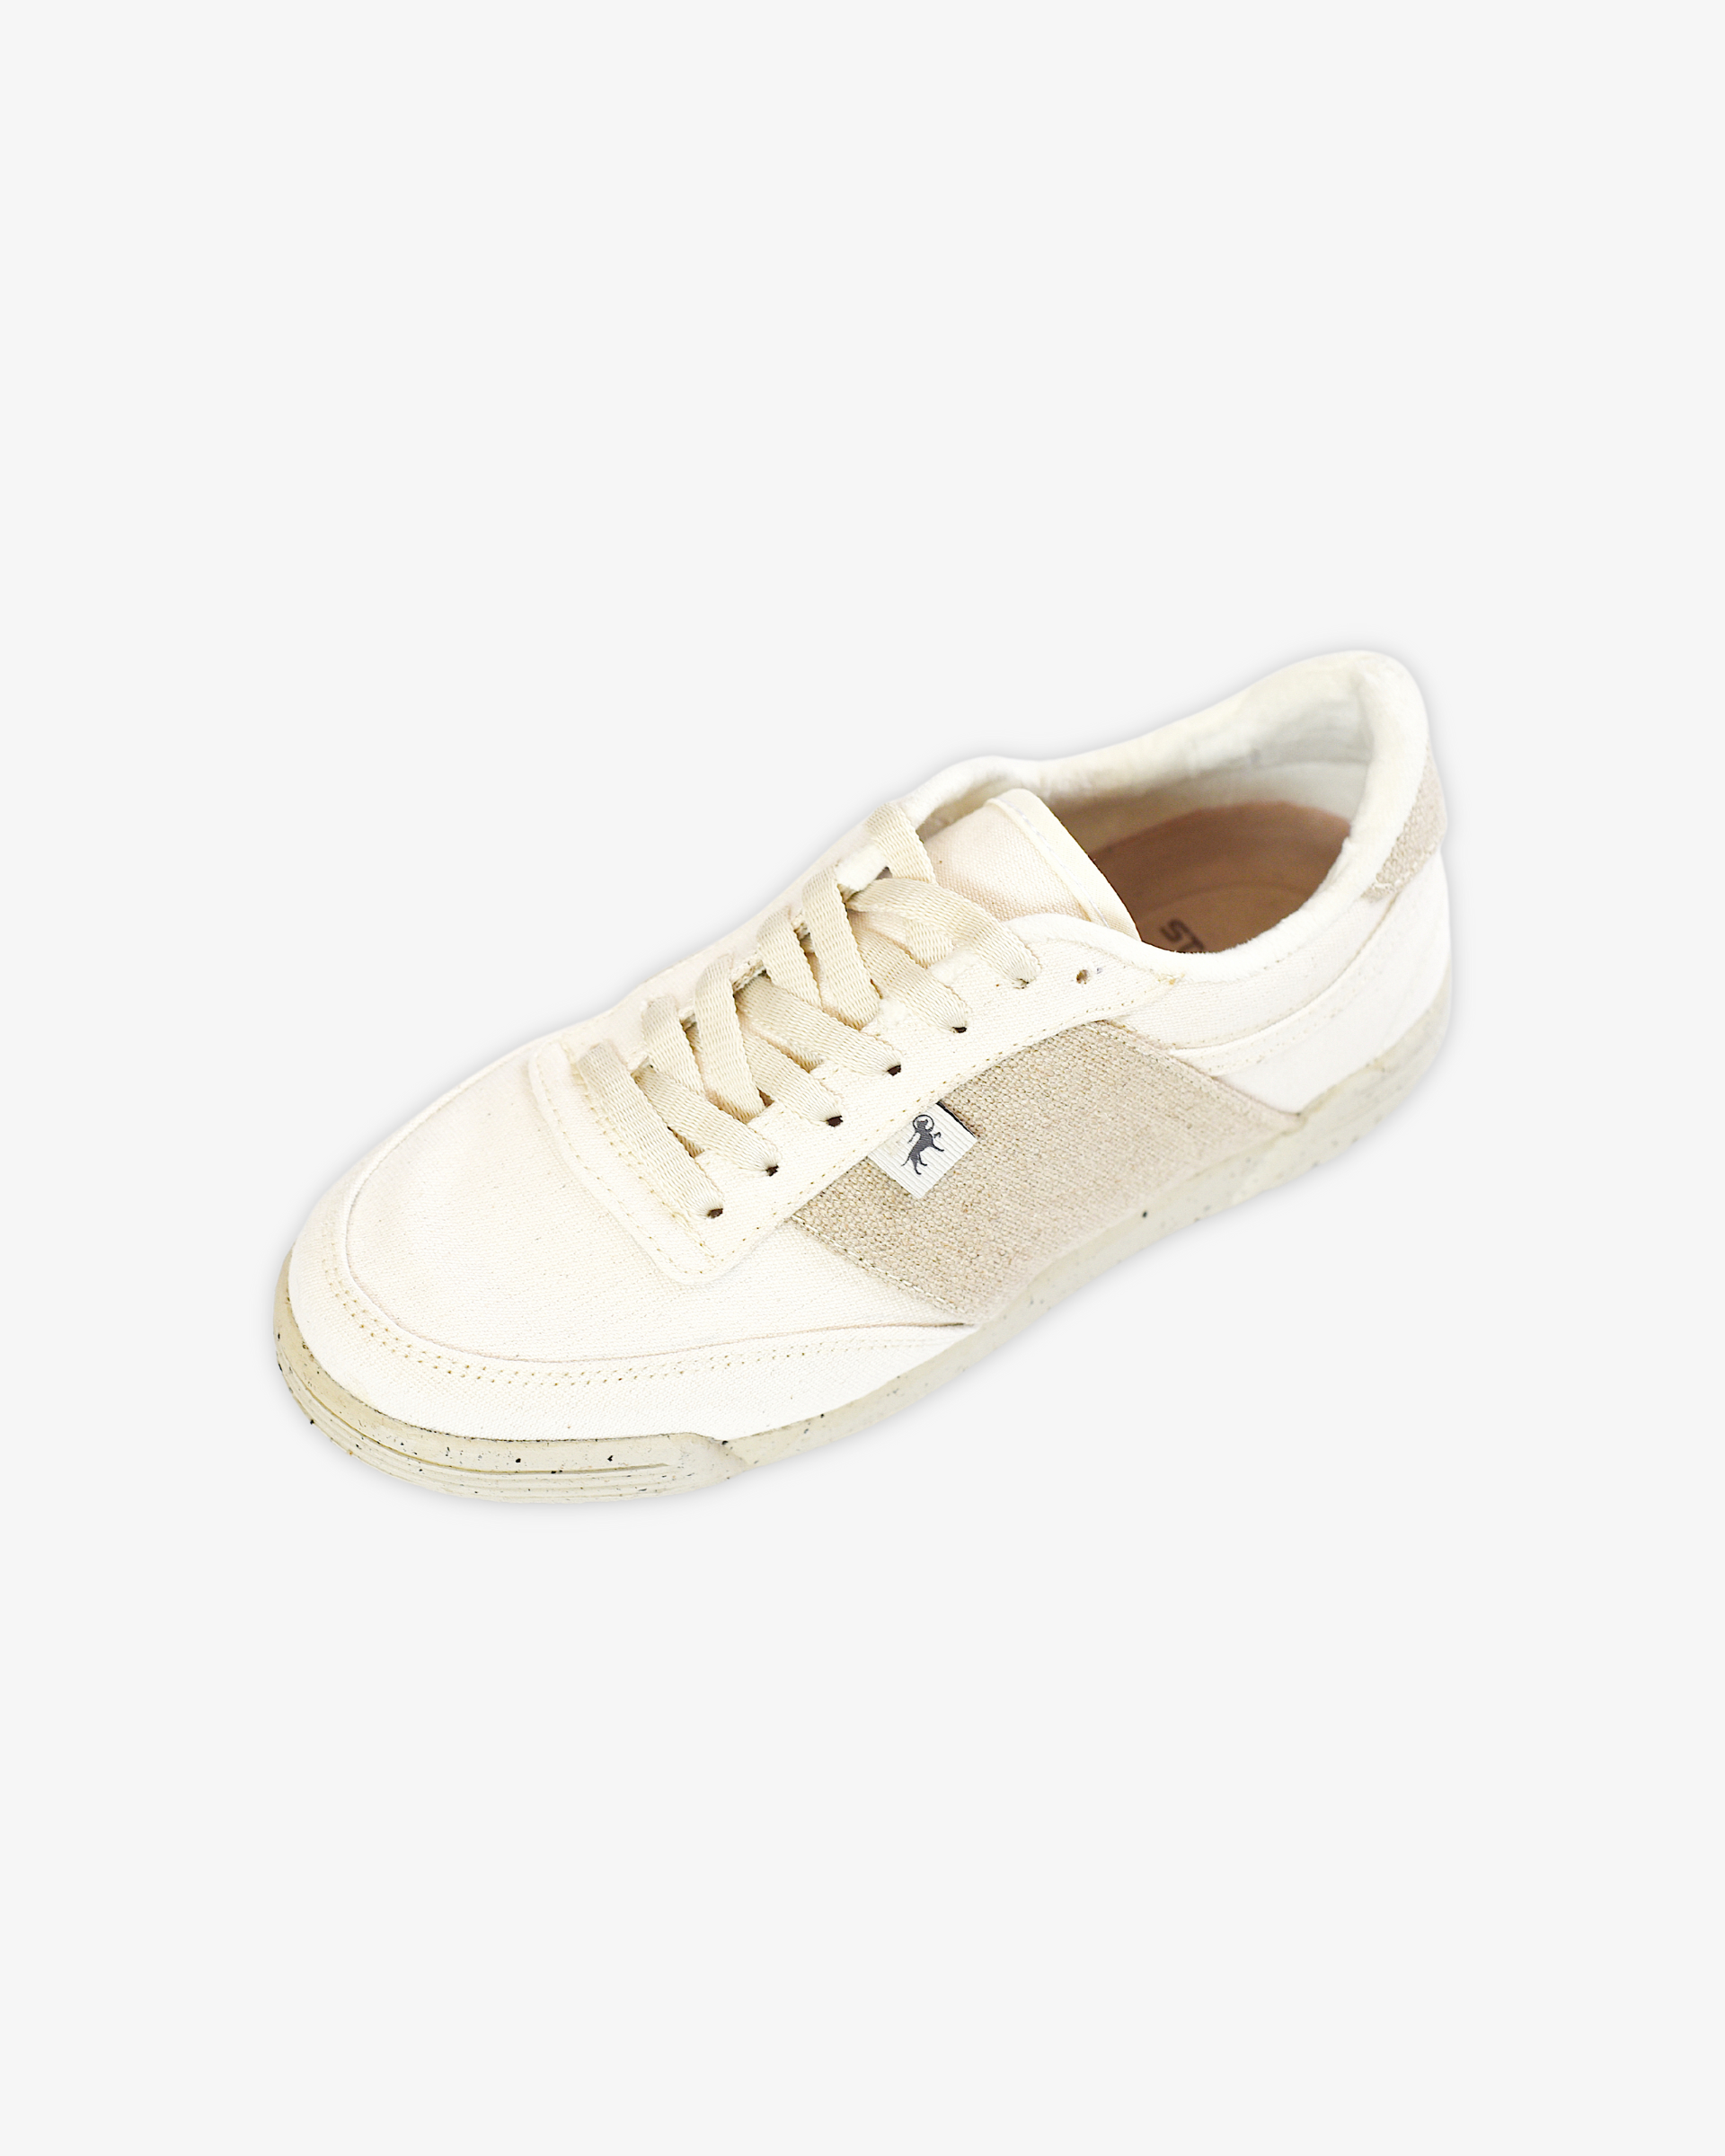 HEMP WOMEN'S EXPEDITION SNEAKERS - WHITE AND LIGHT BROWN (WOMAN)